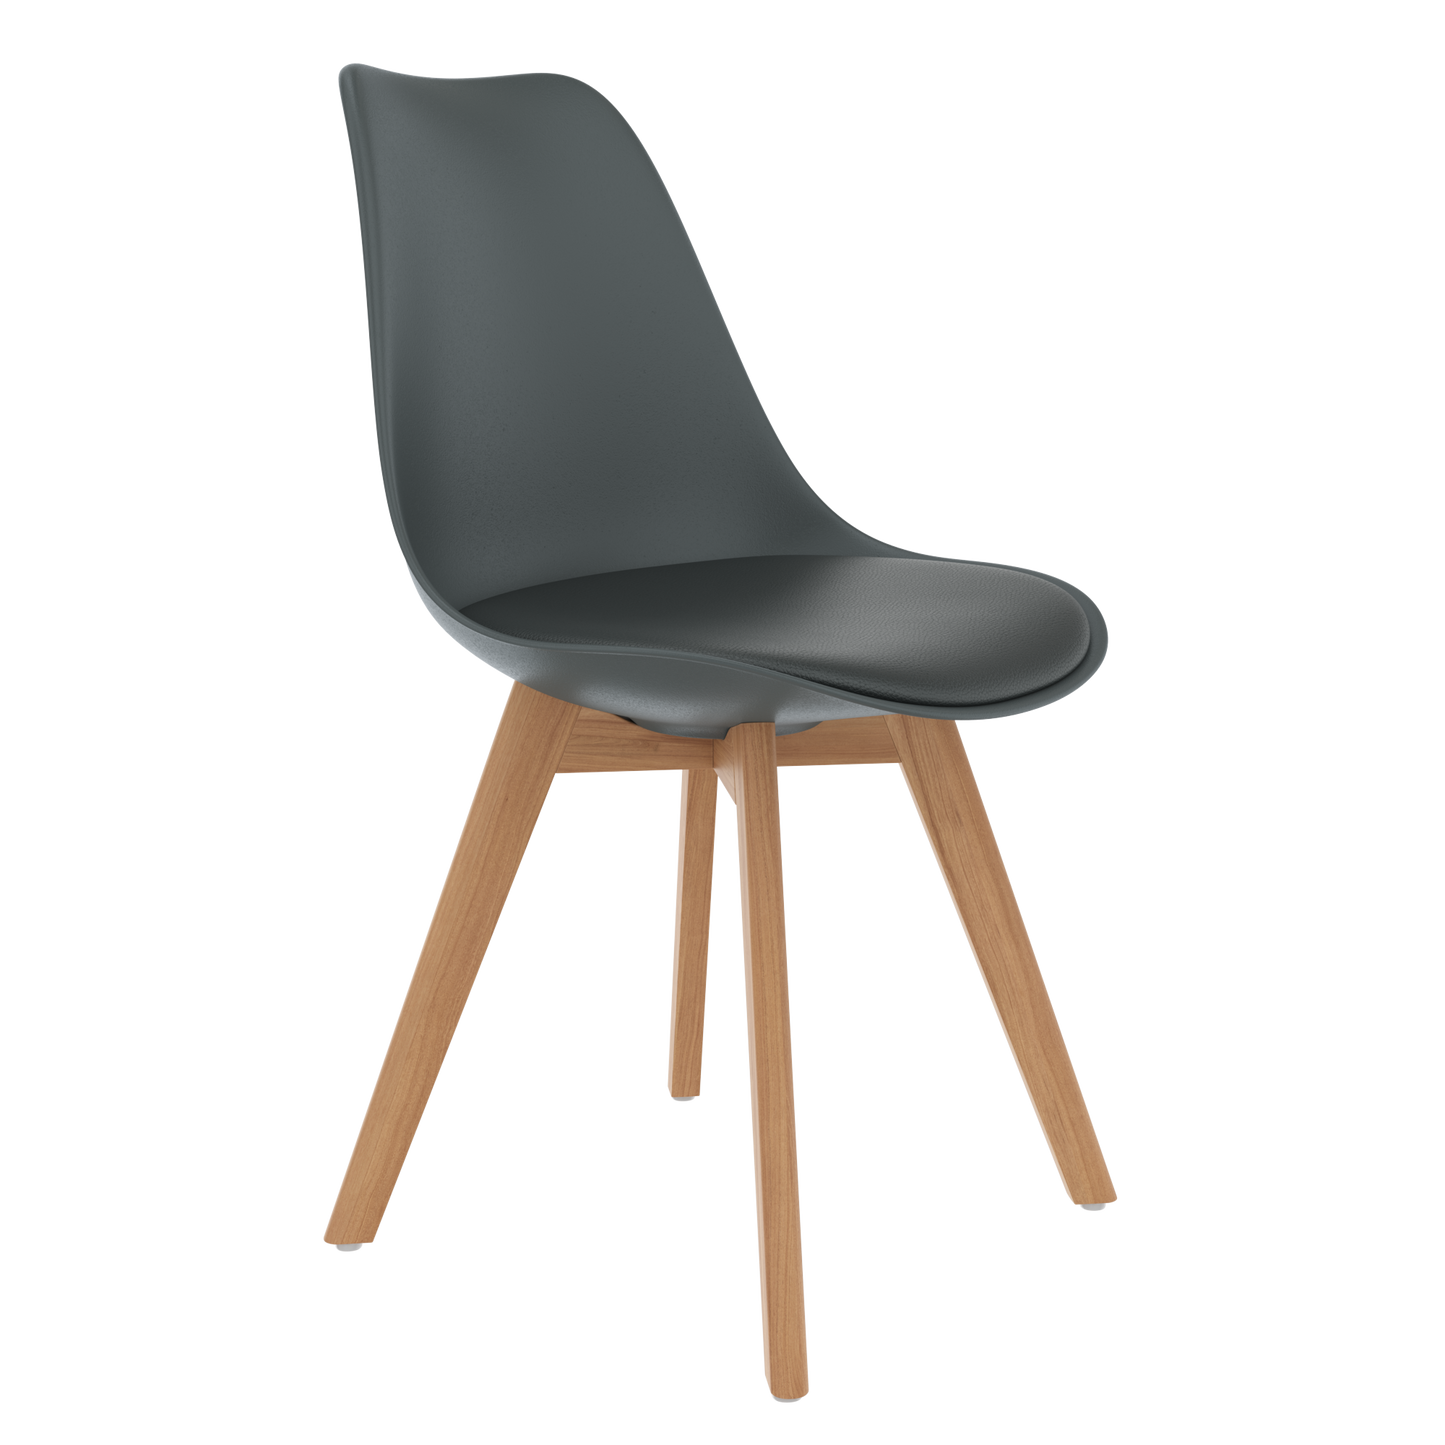 CHOTTO - Ando Dining Chairs - Grey x 4